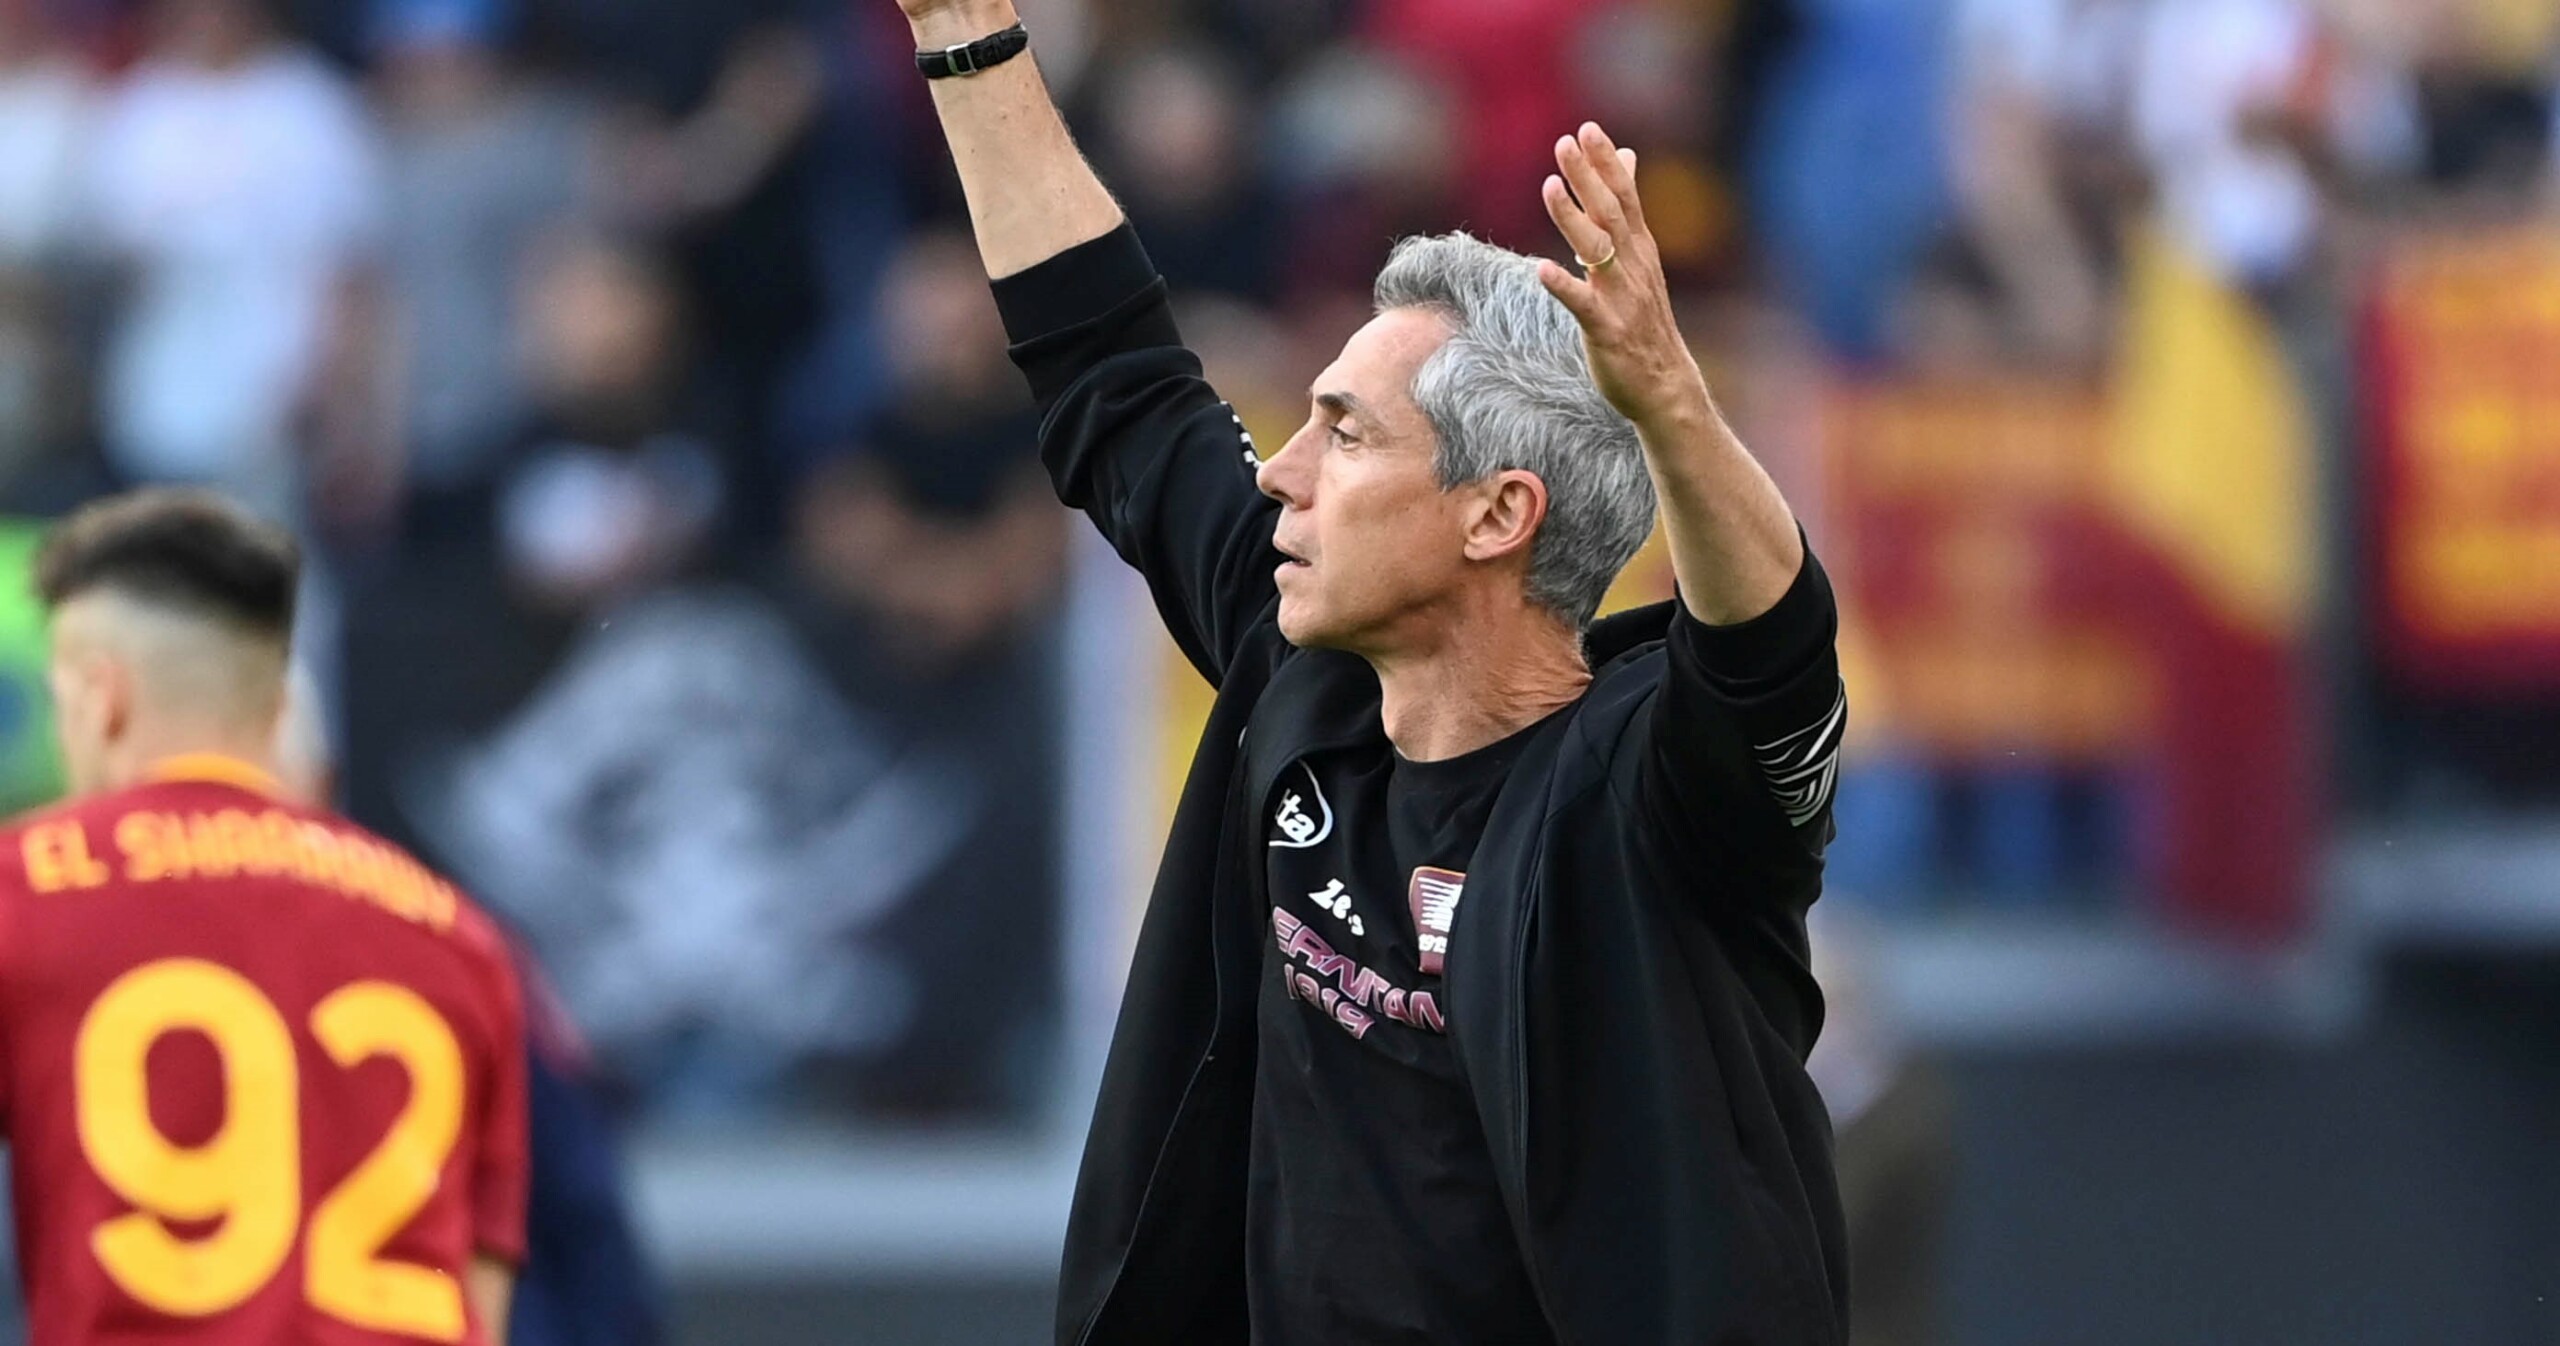 Napoli are going full-steam ahead in their search and will take another look at Paulo Sousa, who was an early candidate to replace Luciano Spalletti.